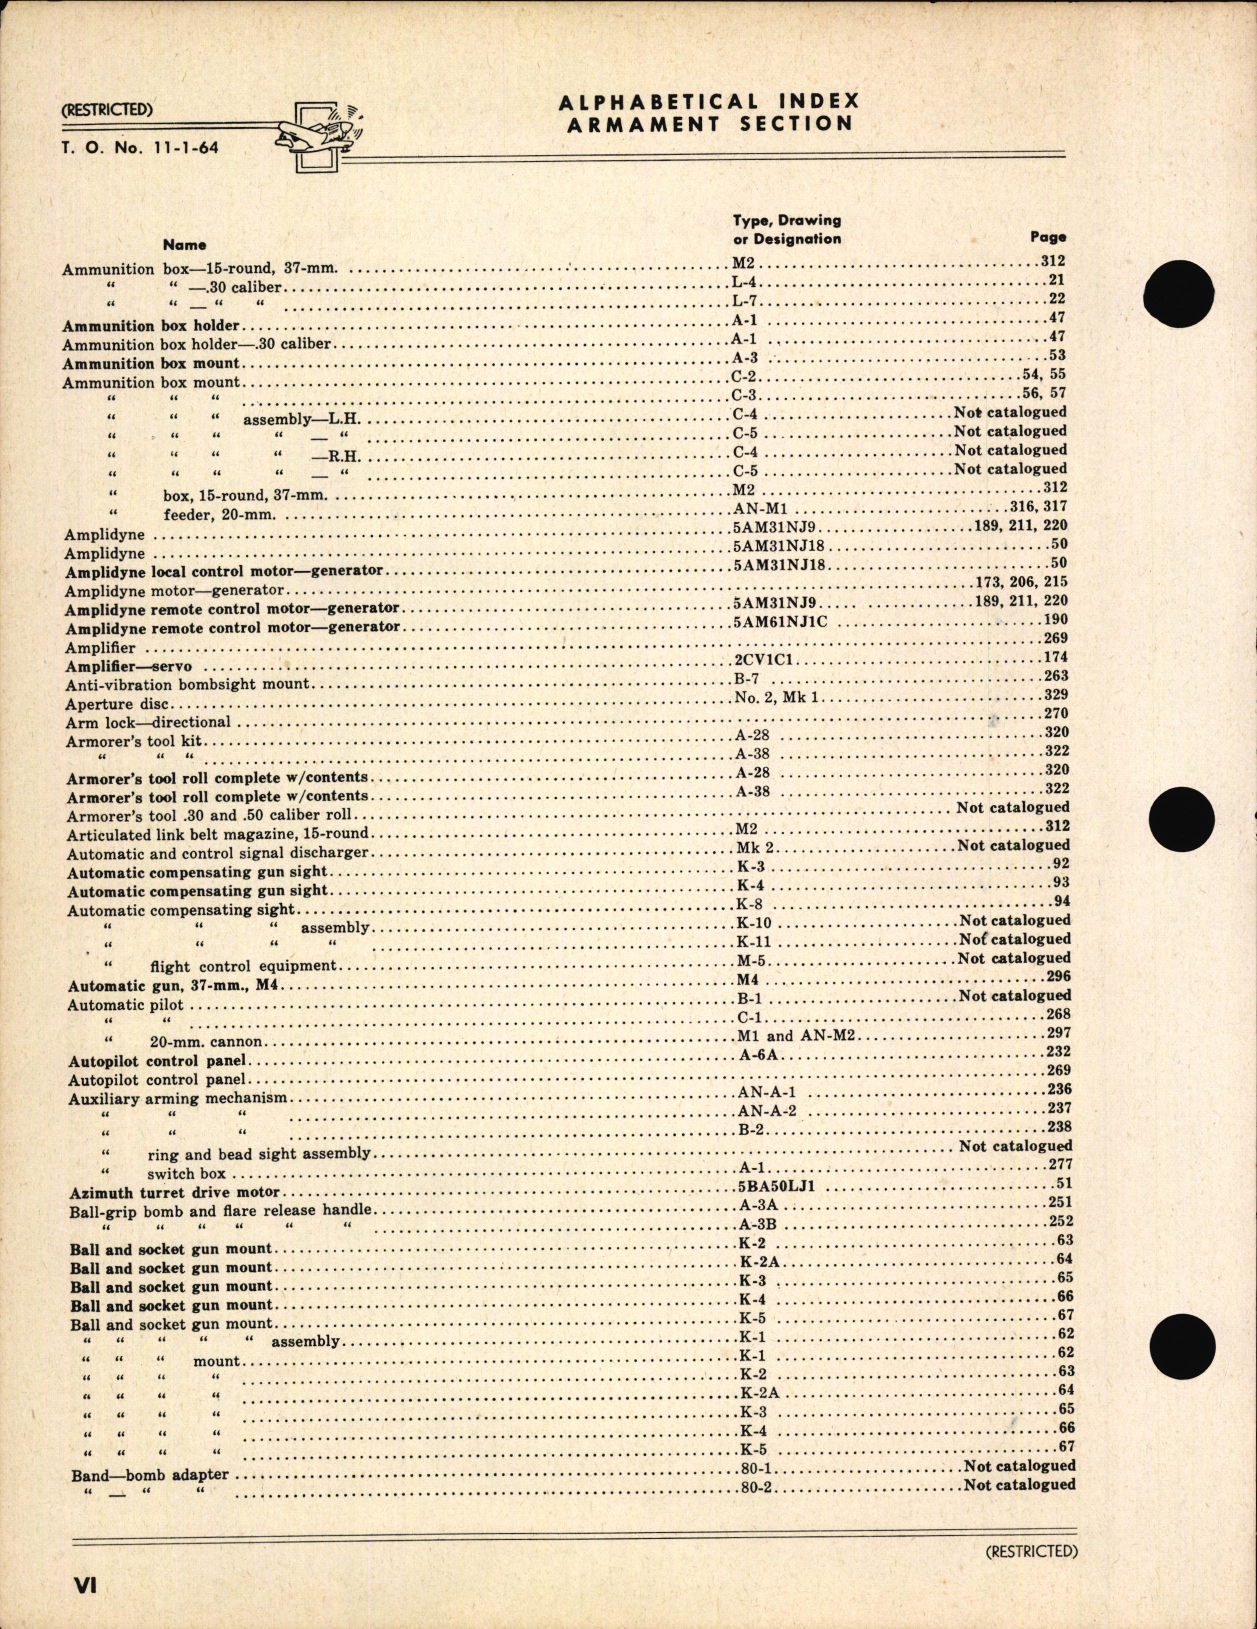 Sample page 6 from AirCorps Library document: Index of Army-Navy Aeronautical Equipment - Armament